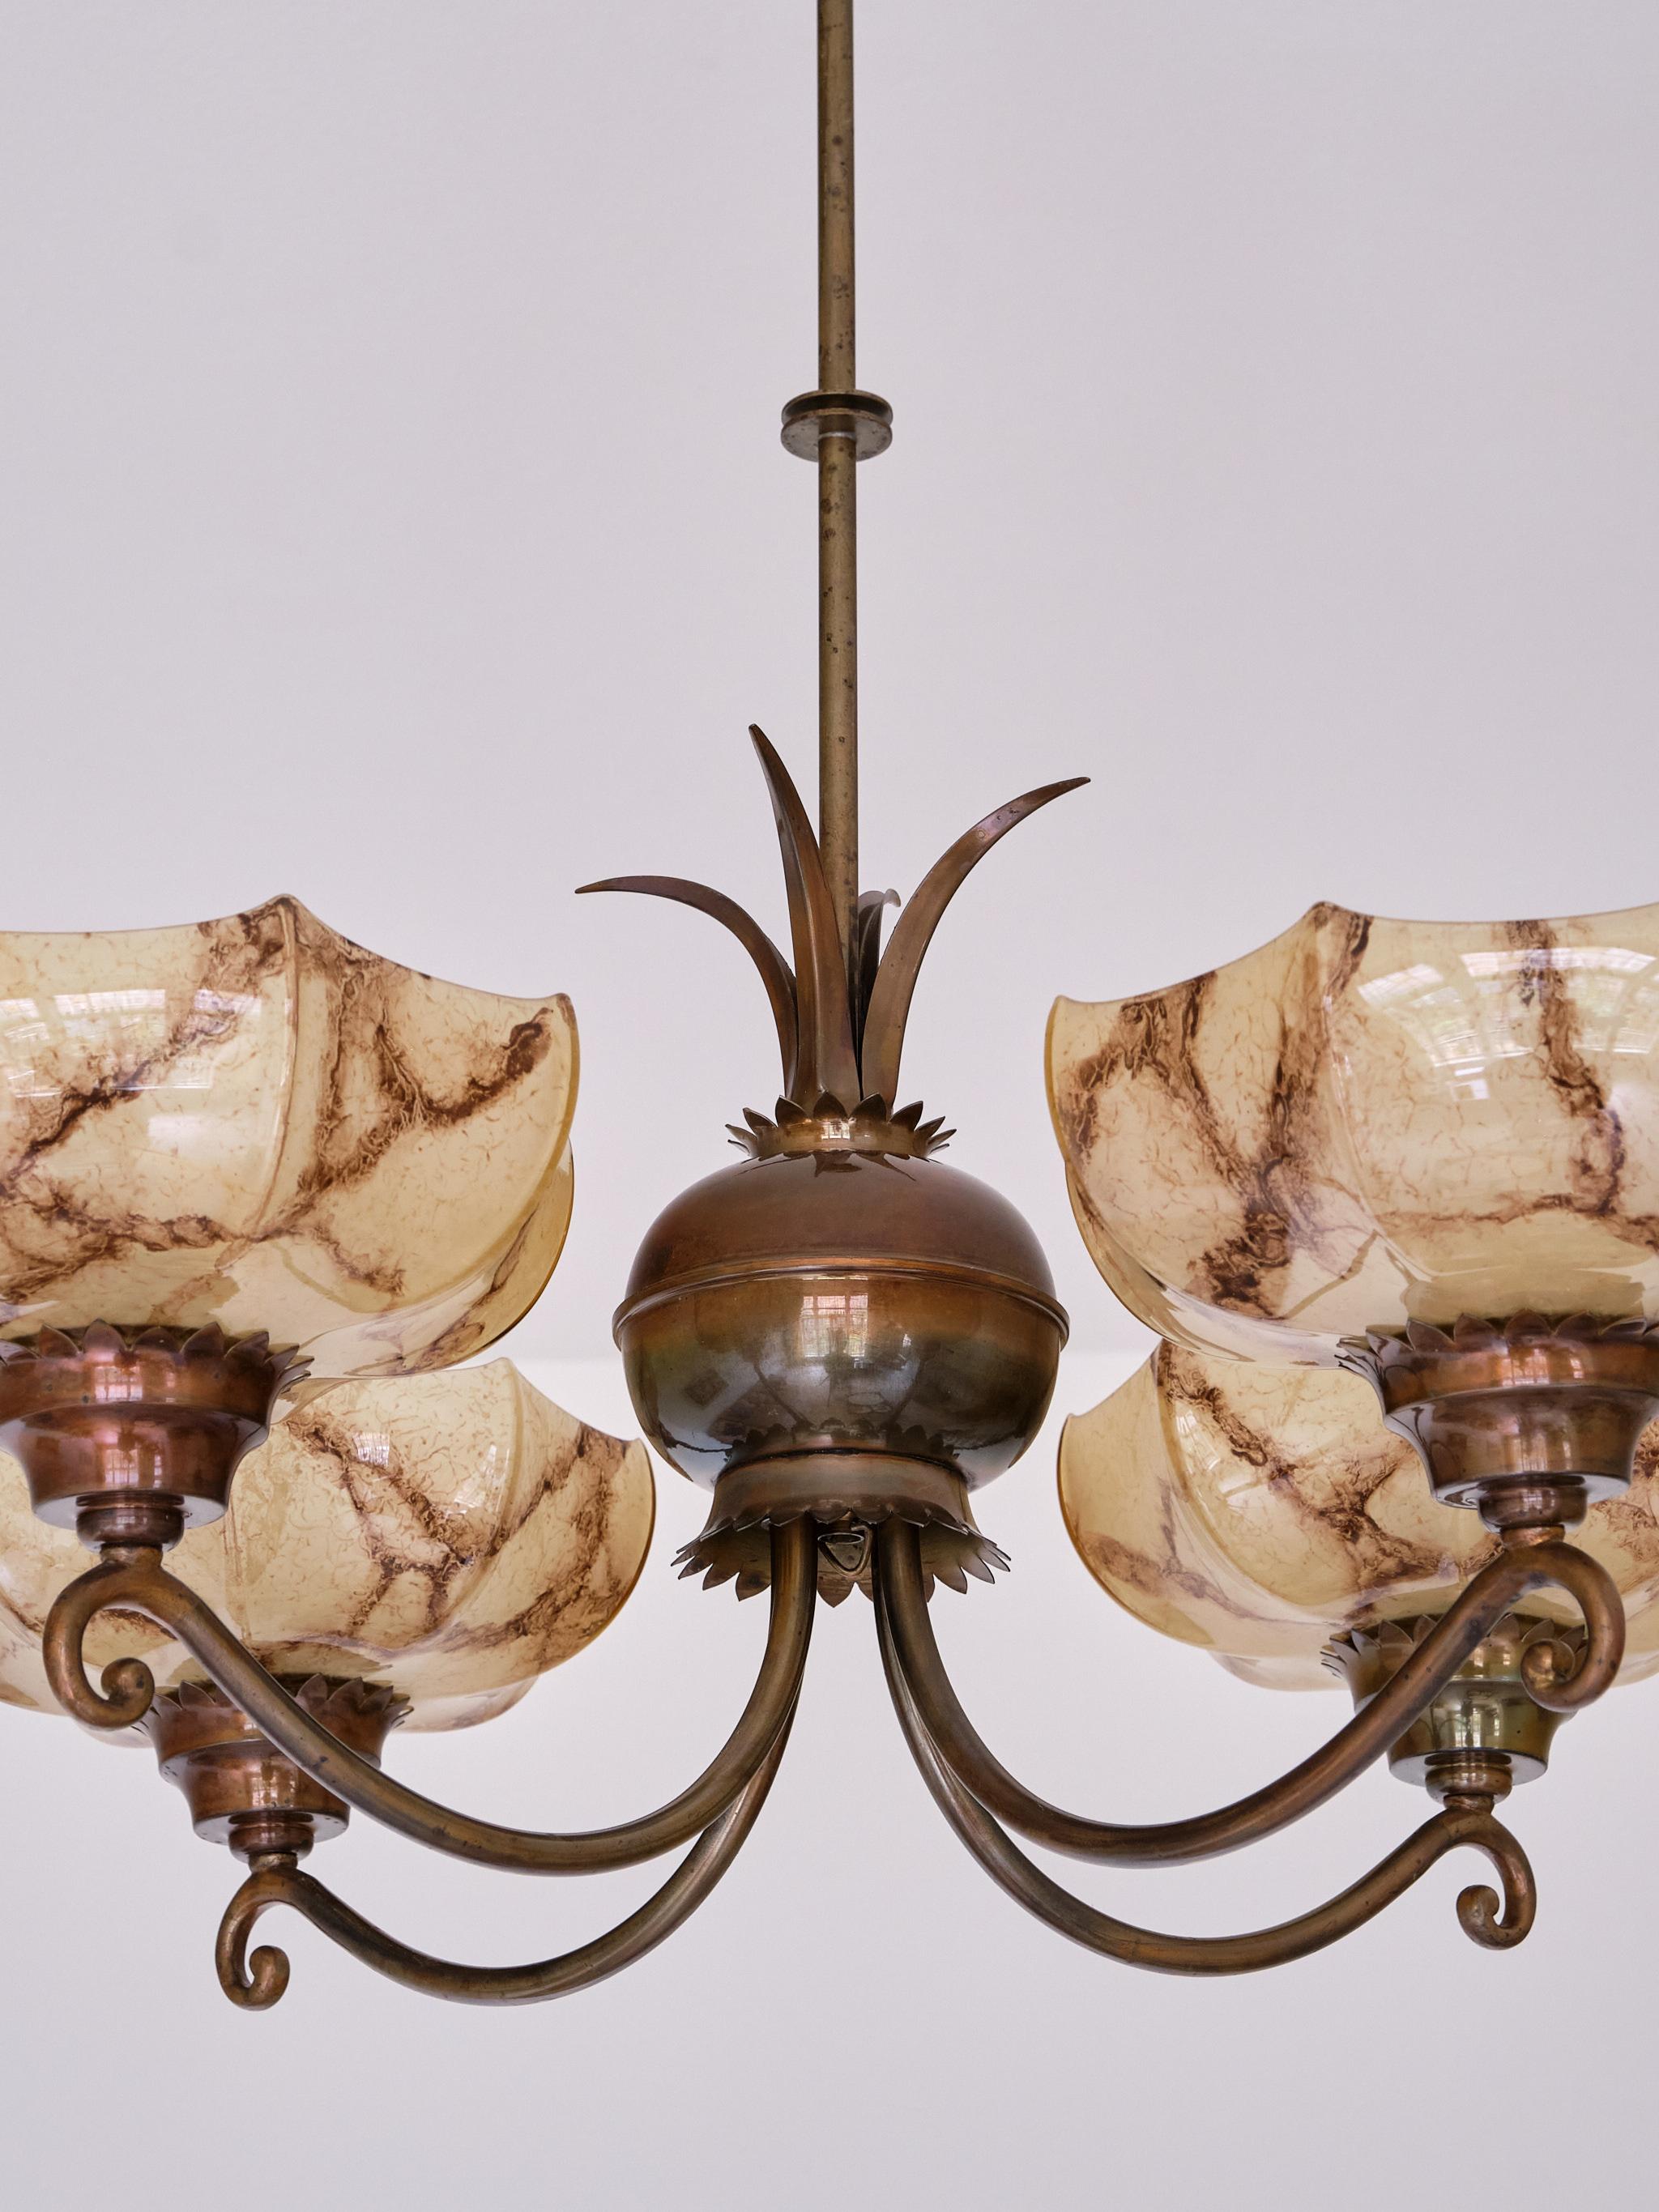 Harald Notini Chandelier in Brass and Marbled Glass, Böhlmarks, Sweden, 1927 For Sale 11